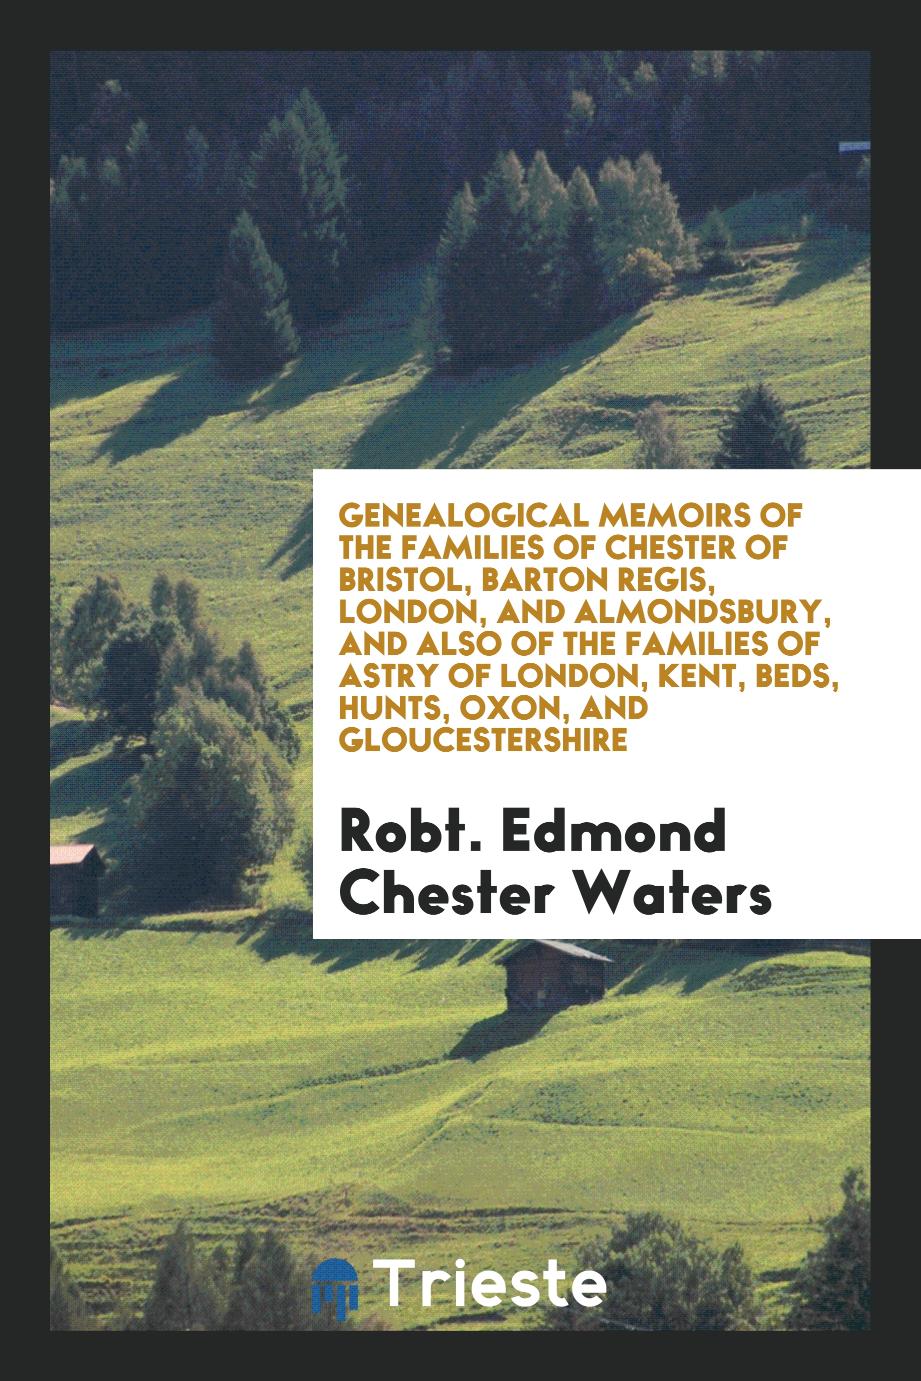 Genealogical Memoirs of the Families of Chester of Bristol, Barton Regis, London, and Almondsbury, and Also of the Families of Astry of London, Kent, Beds, Hunts, Oxon, and Gloucestershire